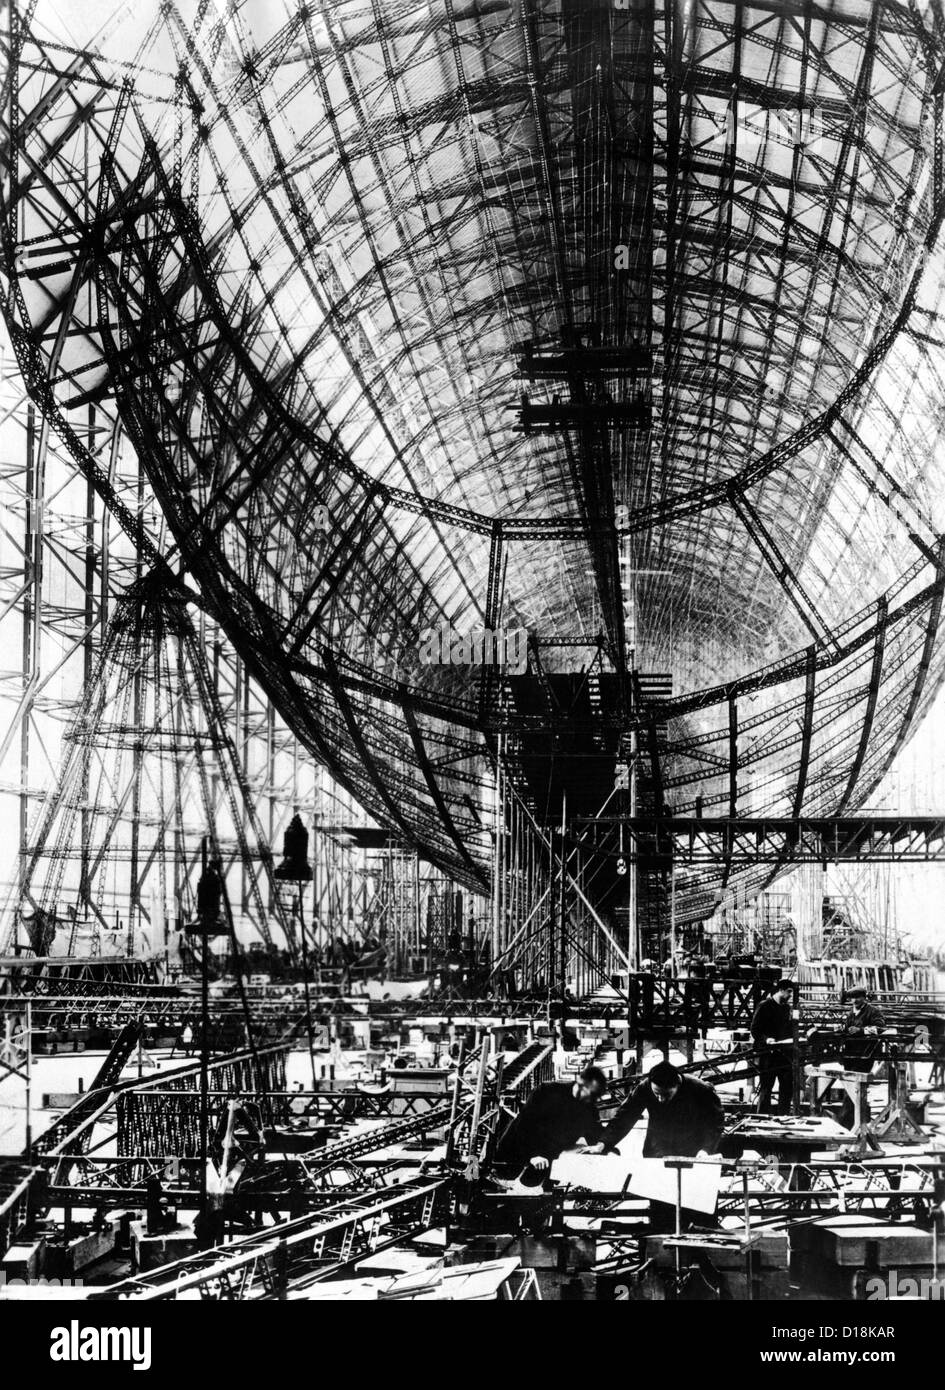 Hindenburg Airship under construction. The almost complete steel frame at the Zeppelin works at Friedrichshafen, Germany. Stock Photo